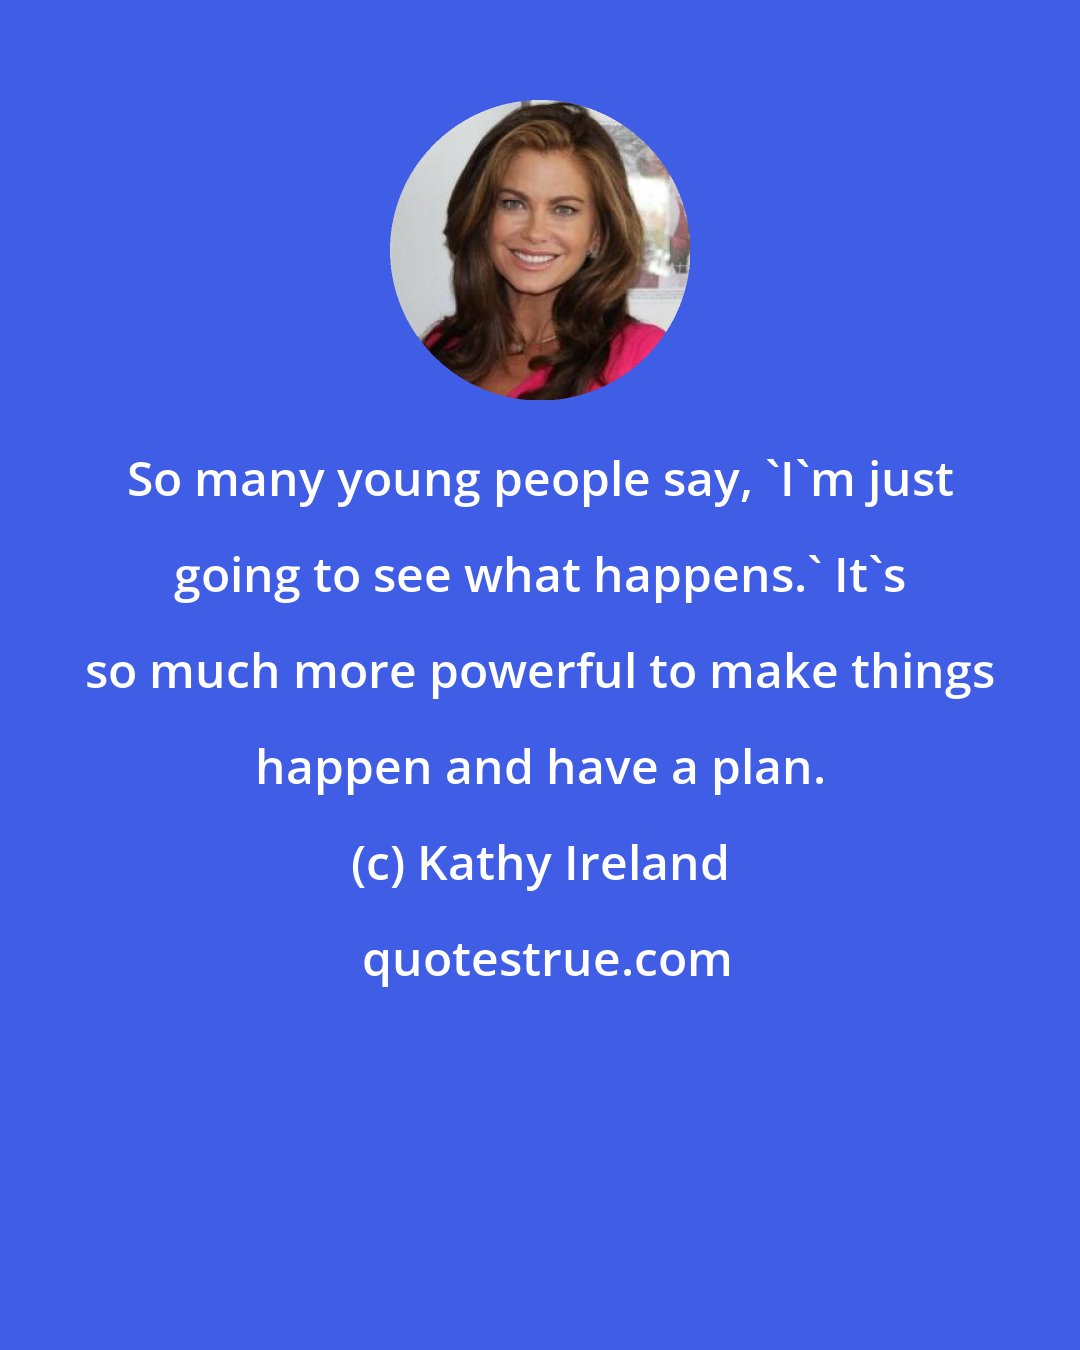 Kathy Ireland: So many young people say, 'I'm just going to see what happens.' It's so much more powerful to make things happen and have a plan.